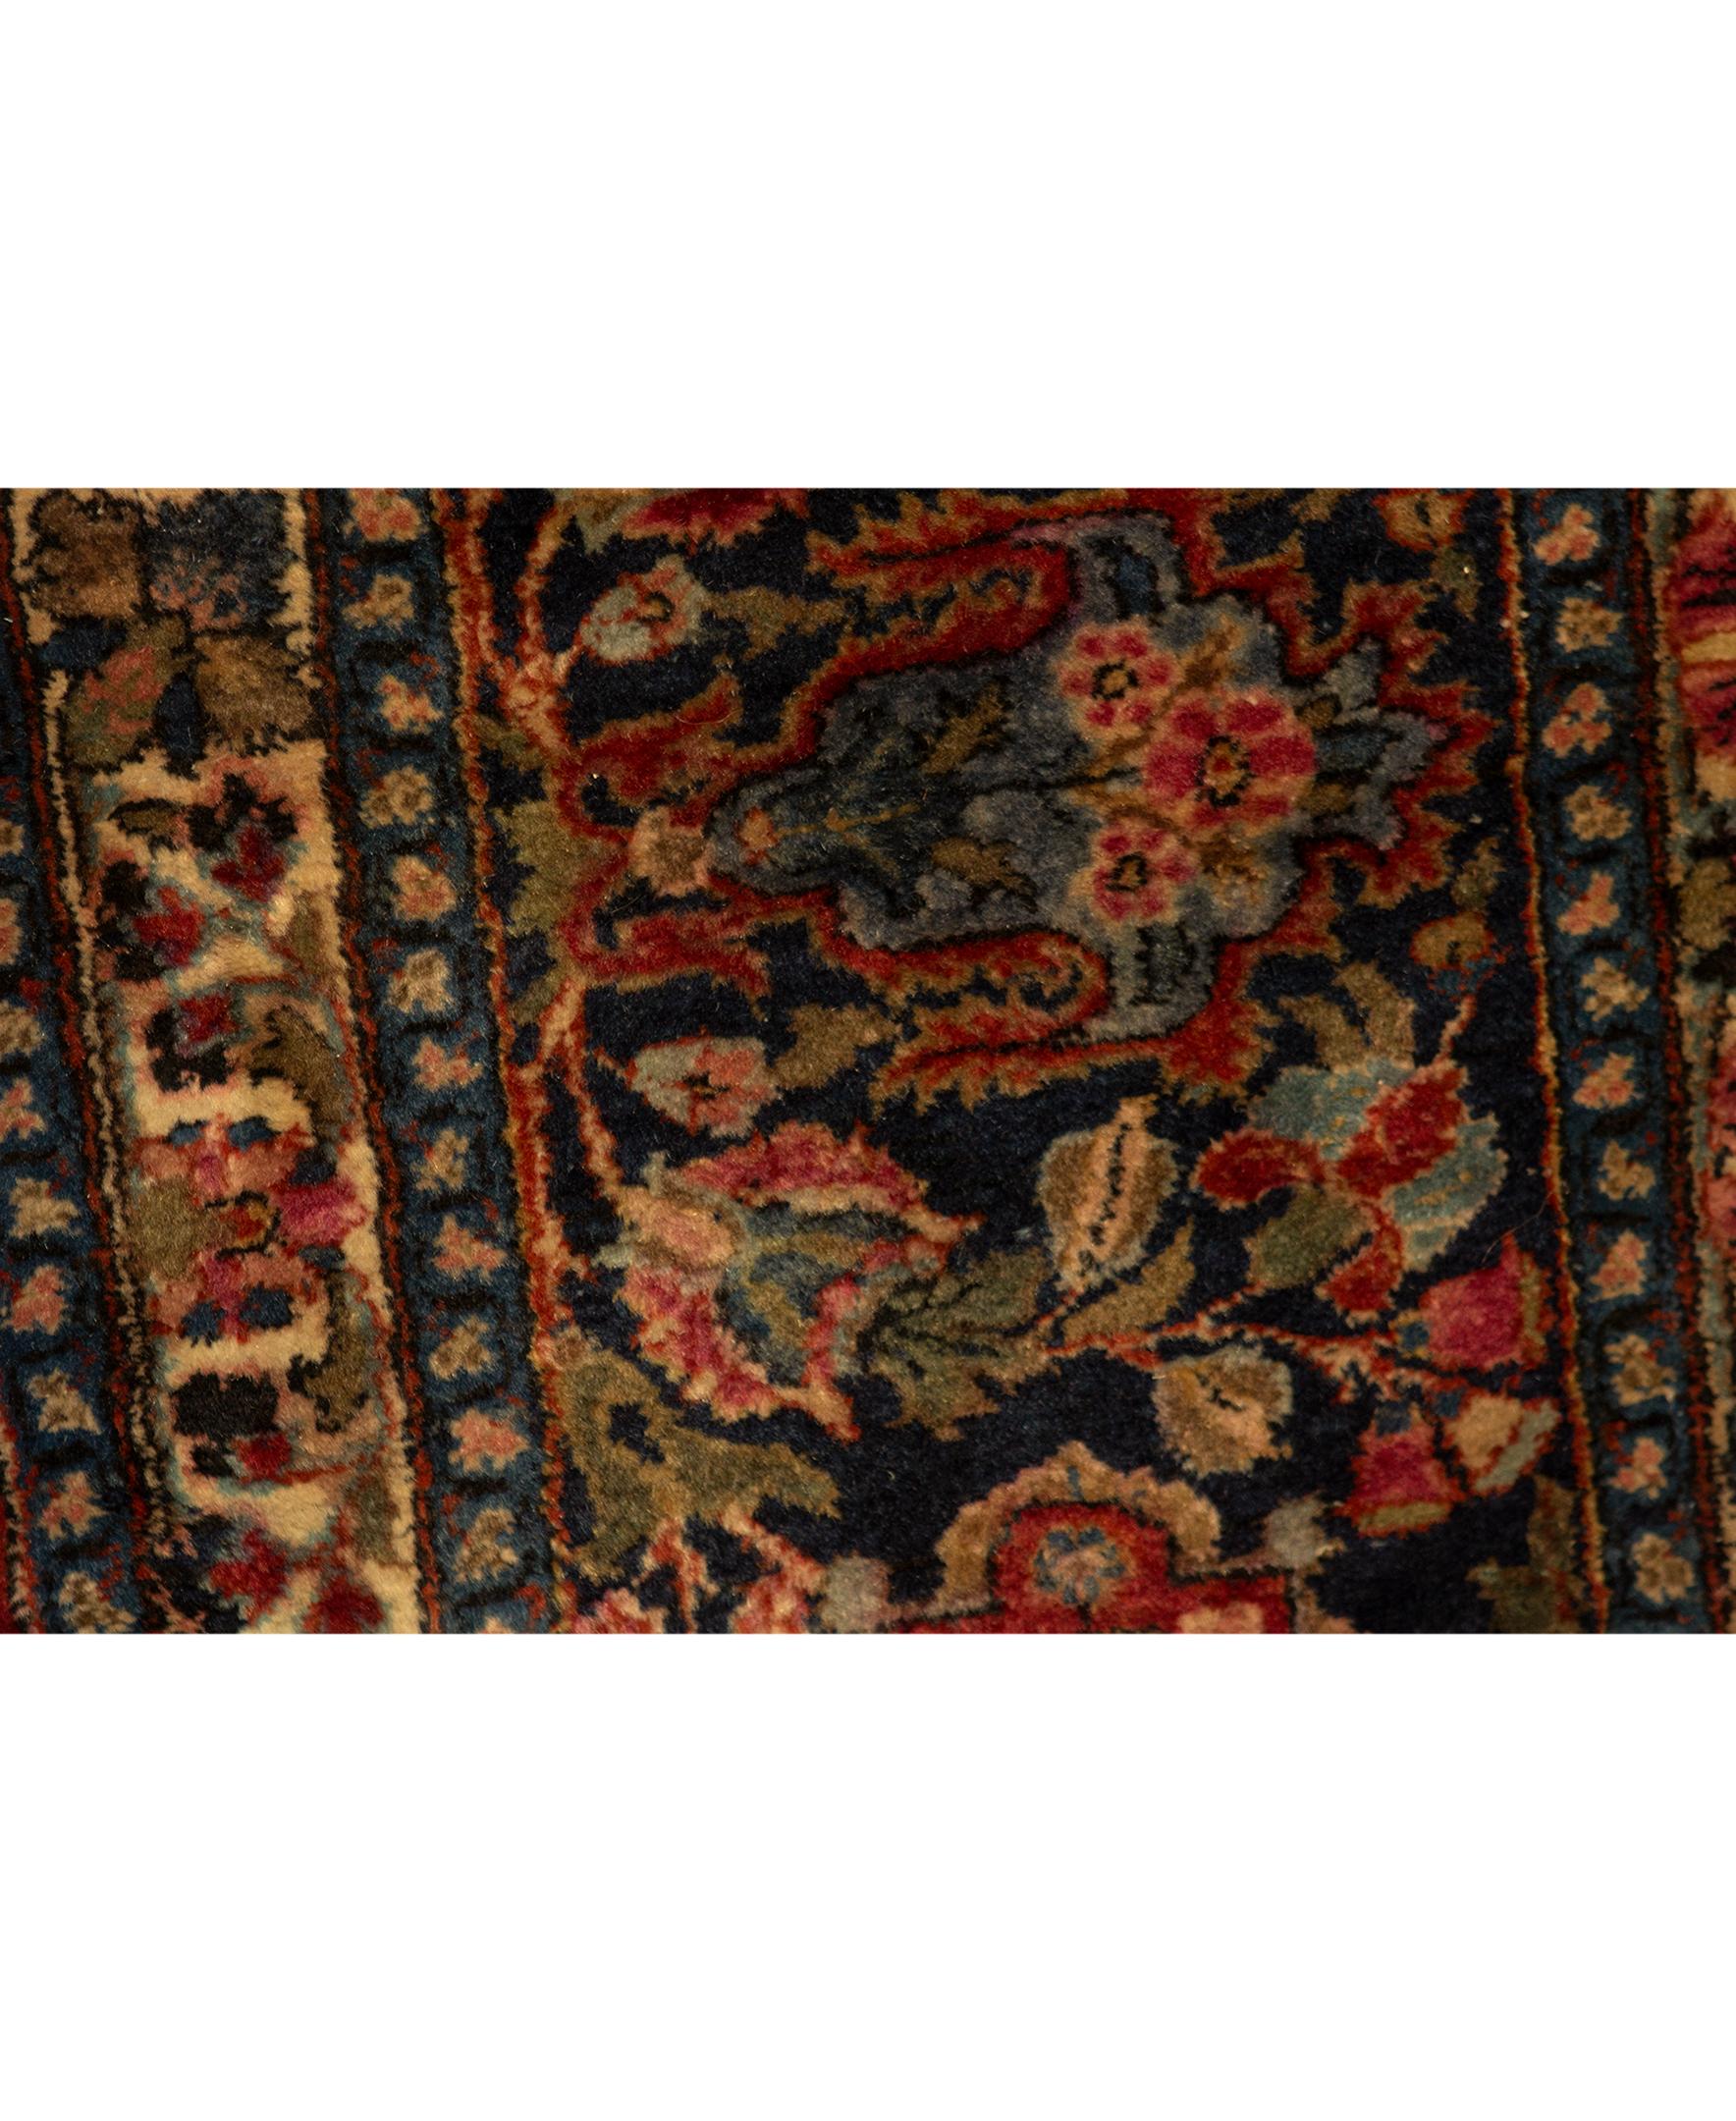   Antique Persian Fine Traditional Handwoven Luxury Wool Red / Navy Rug. Size: 11' X 14'
